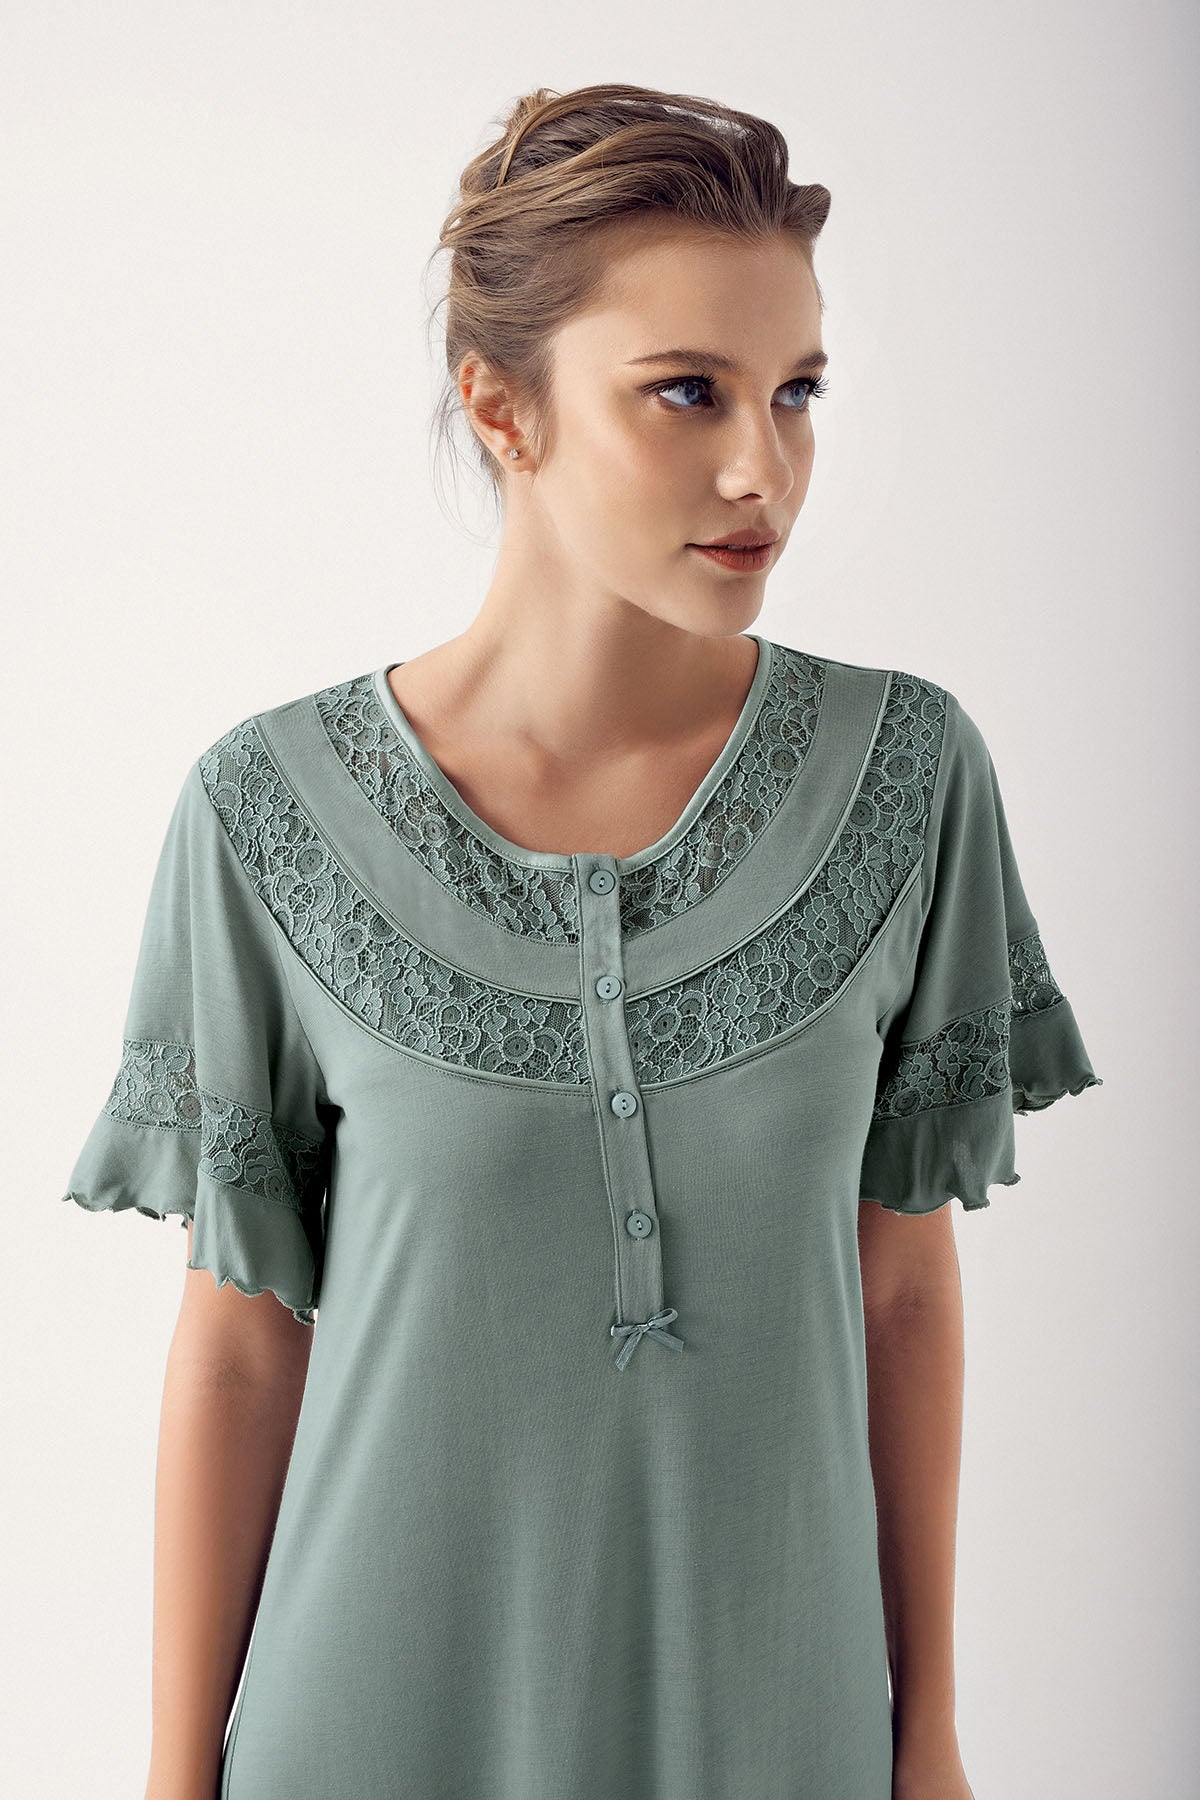 Shopymommy 14107 Guipure Collar Plus Size Maternity & Nursing Nightgown Green